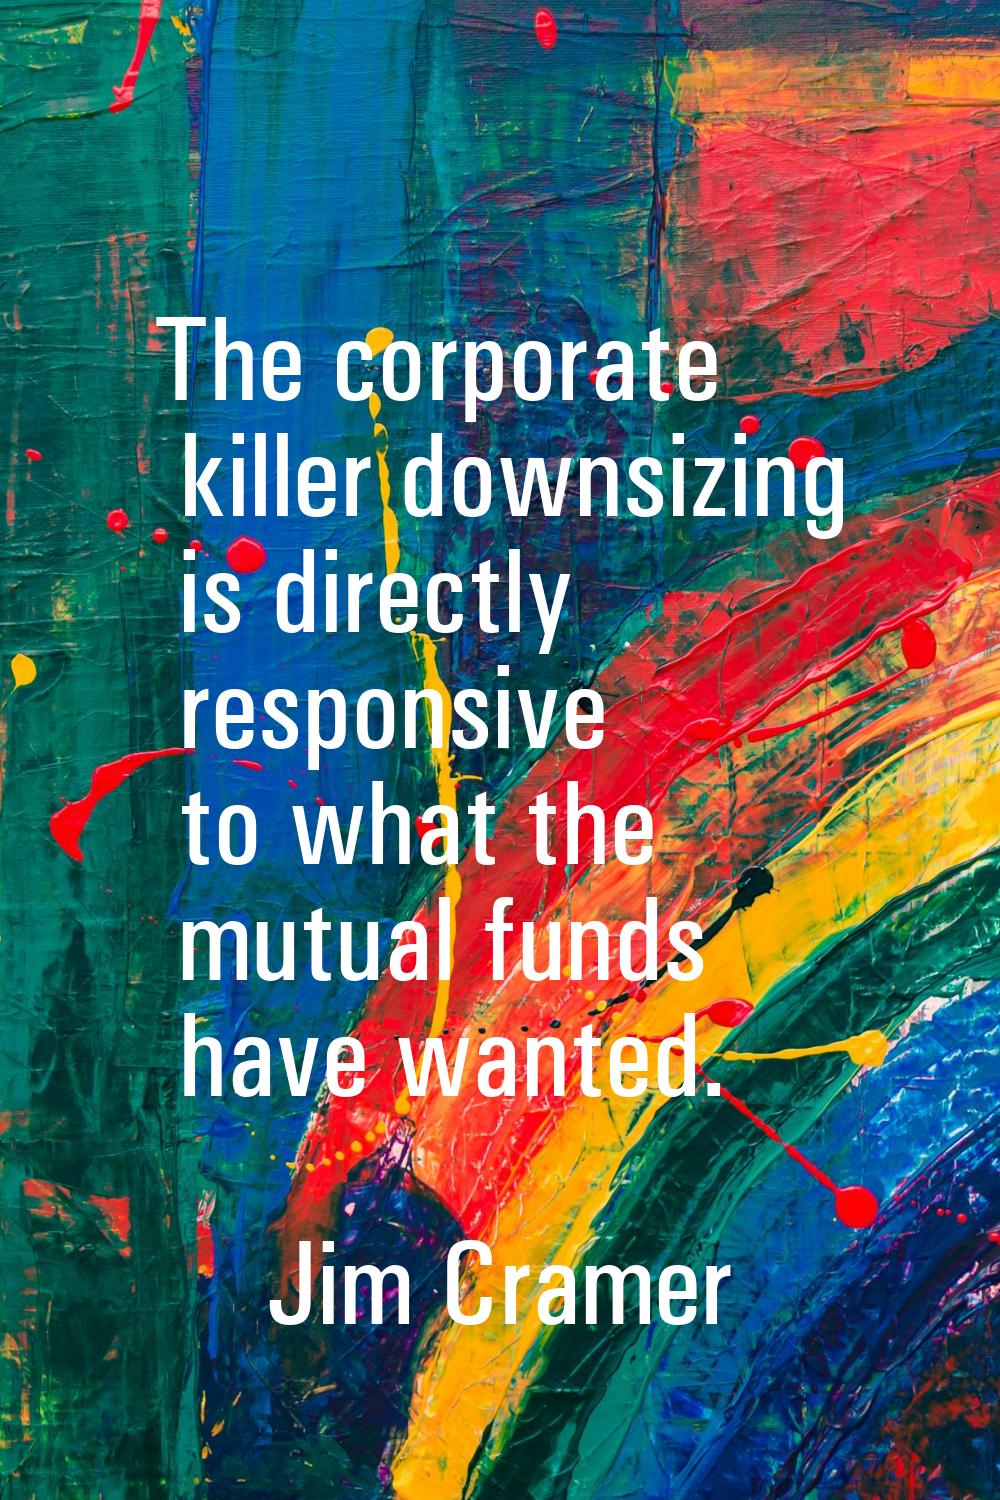 The corporate killer downsizing is directly responsive to what the mutual funds have wanted.